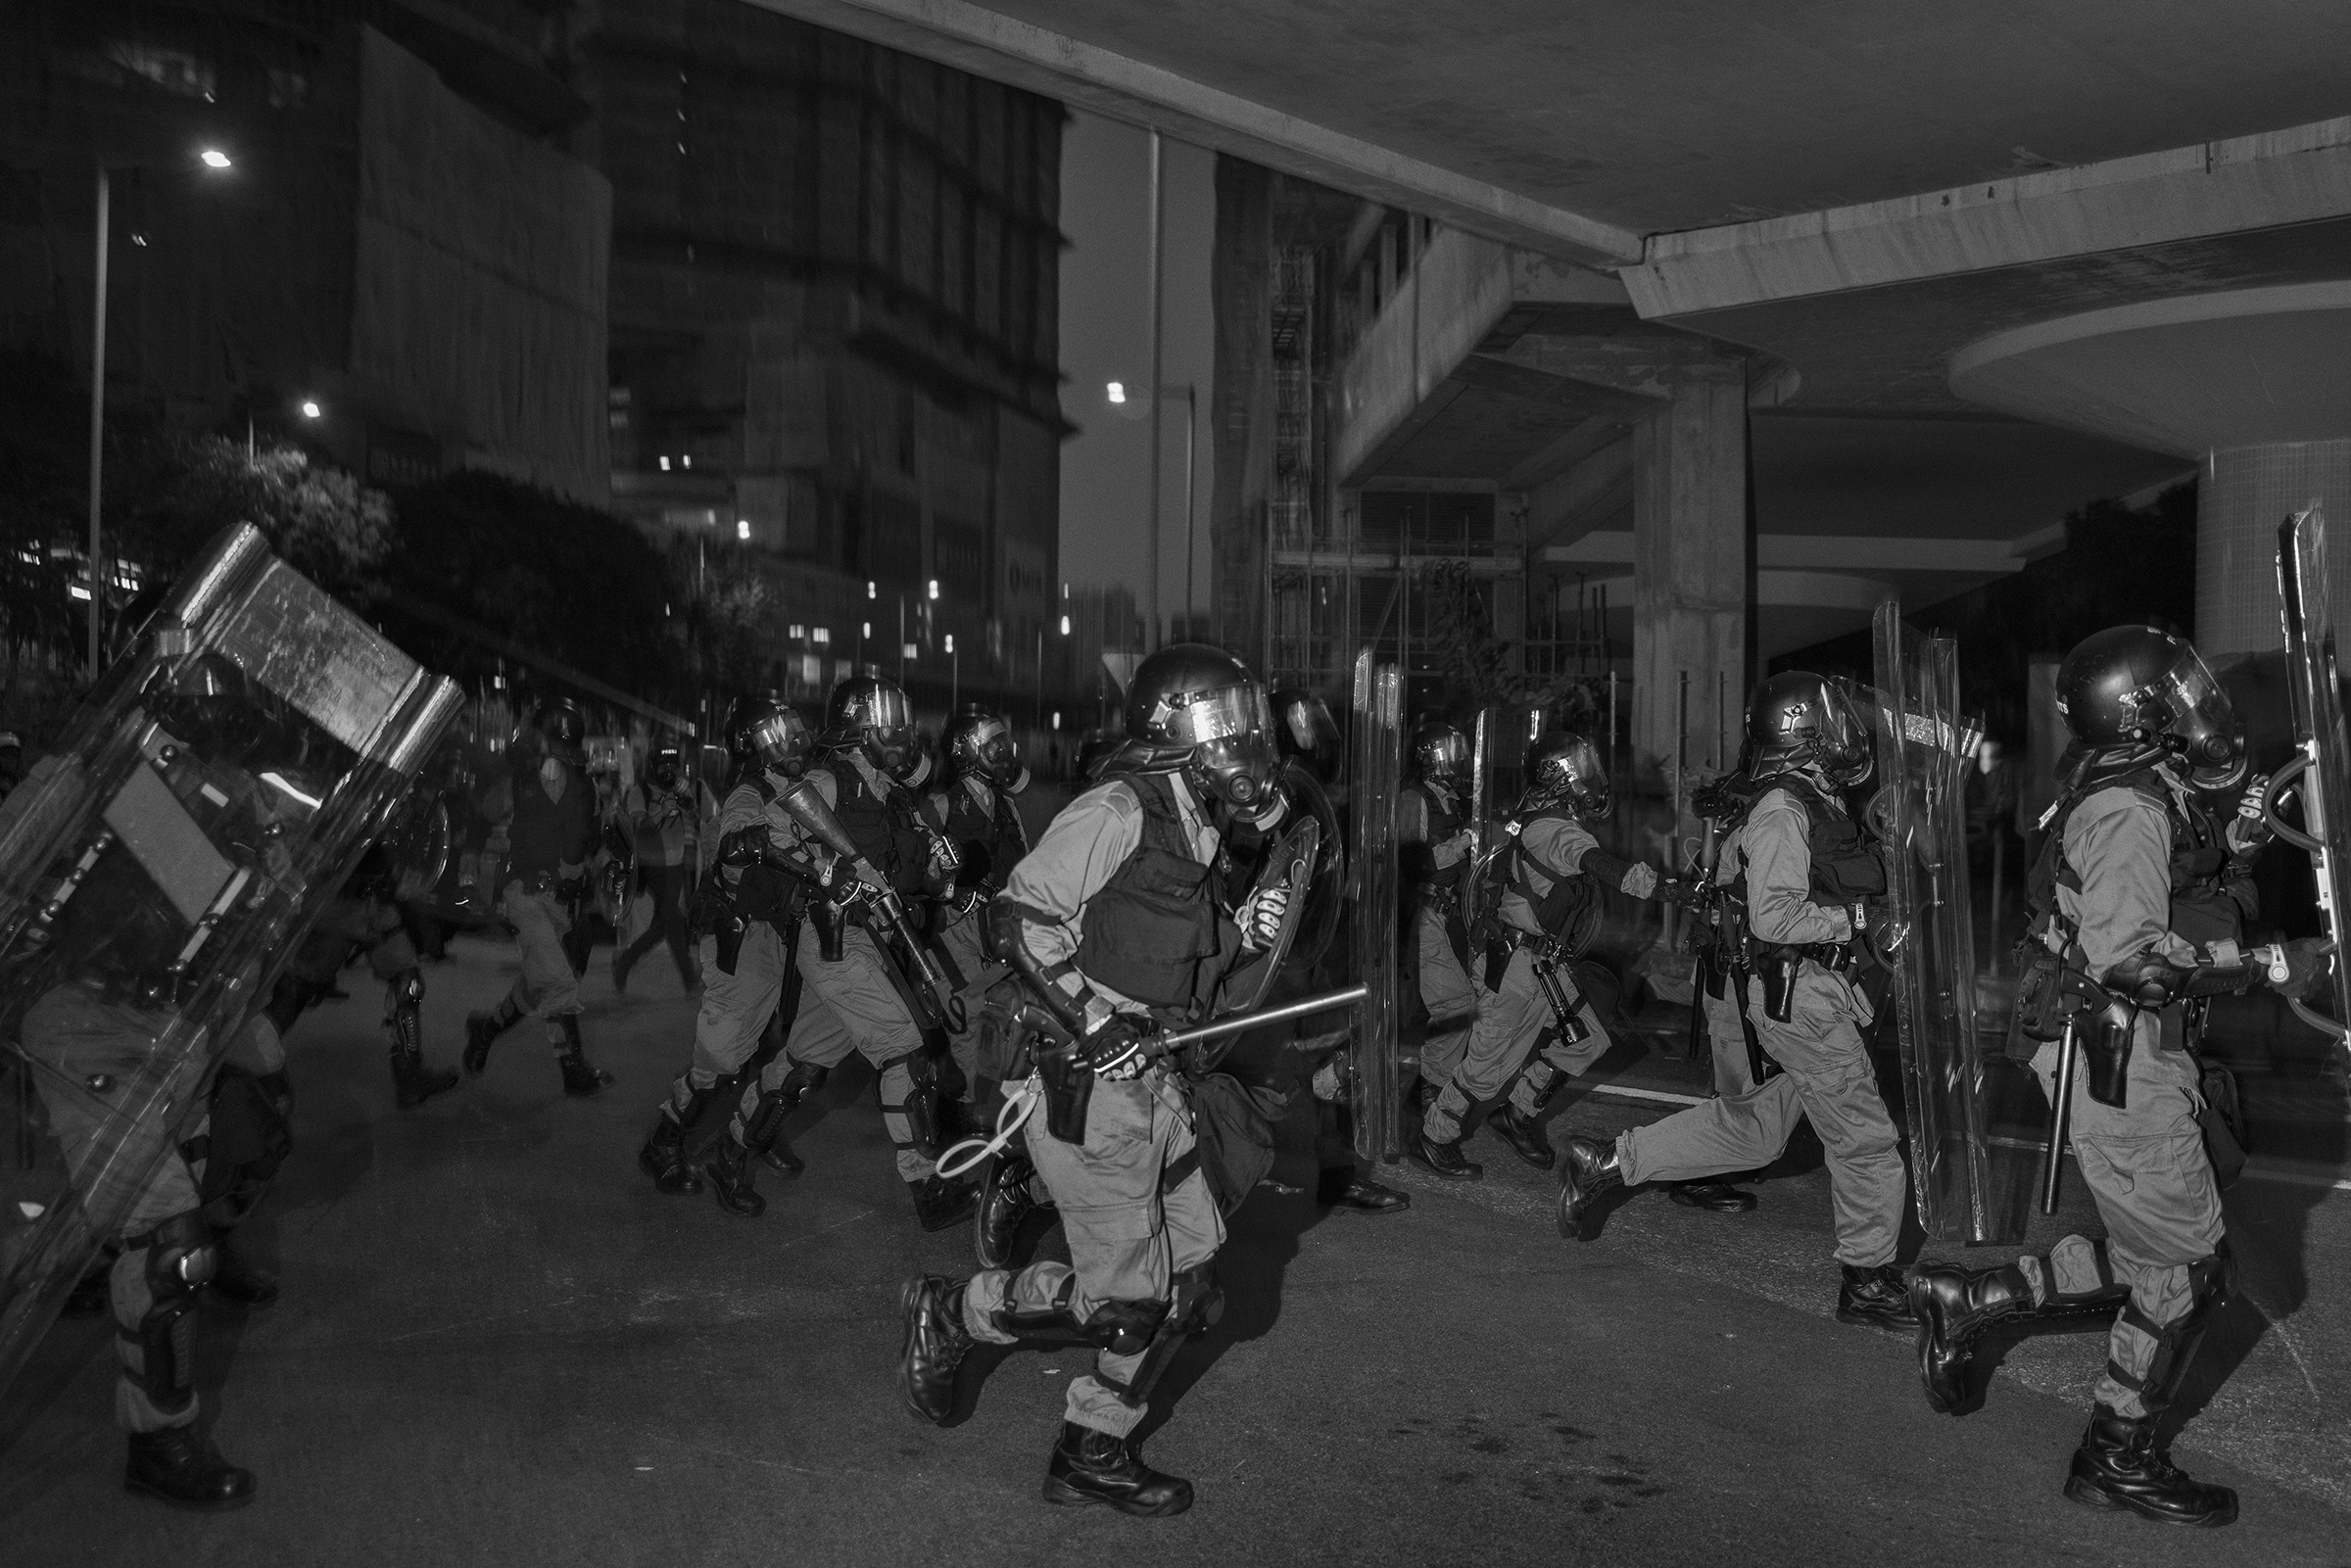 Riot police clear an unauthorized antigovernment protest near the Tai Wai train station on Aug. 10. (Adam Ferguson for TIME)